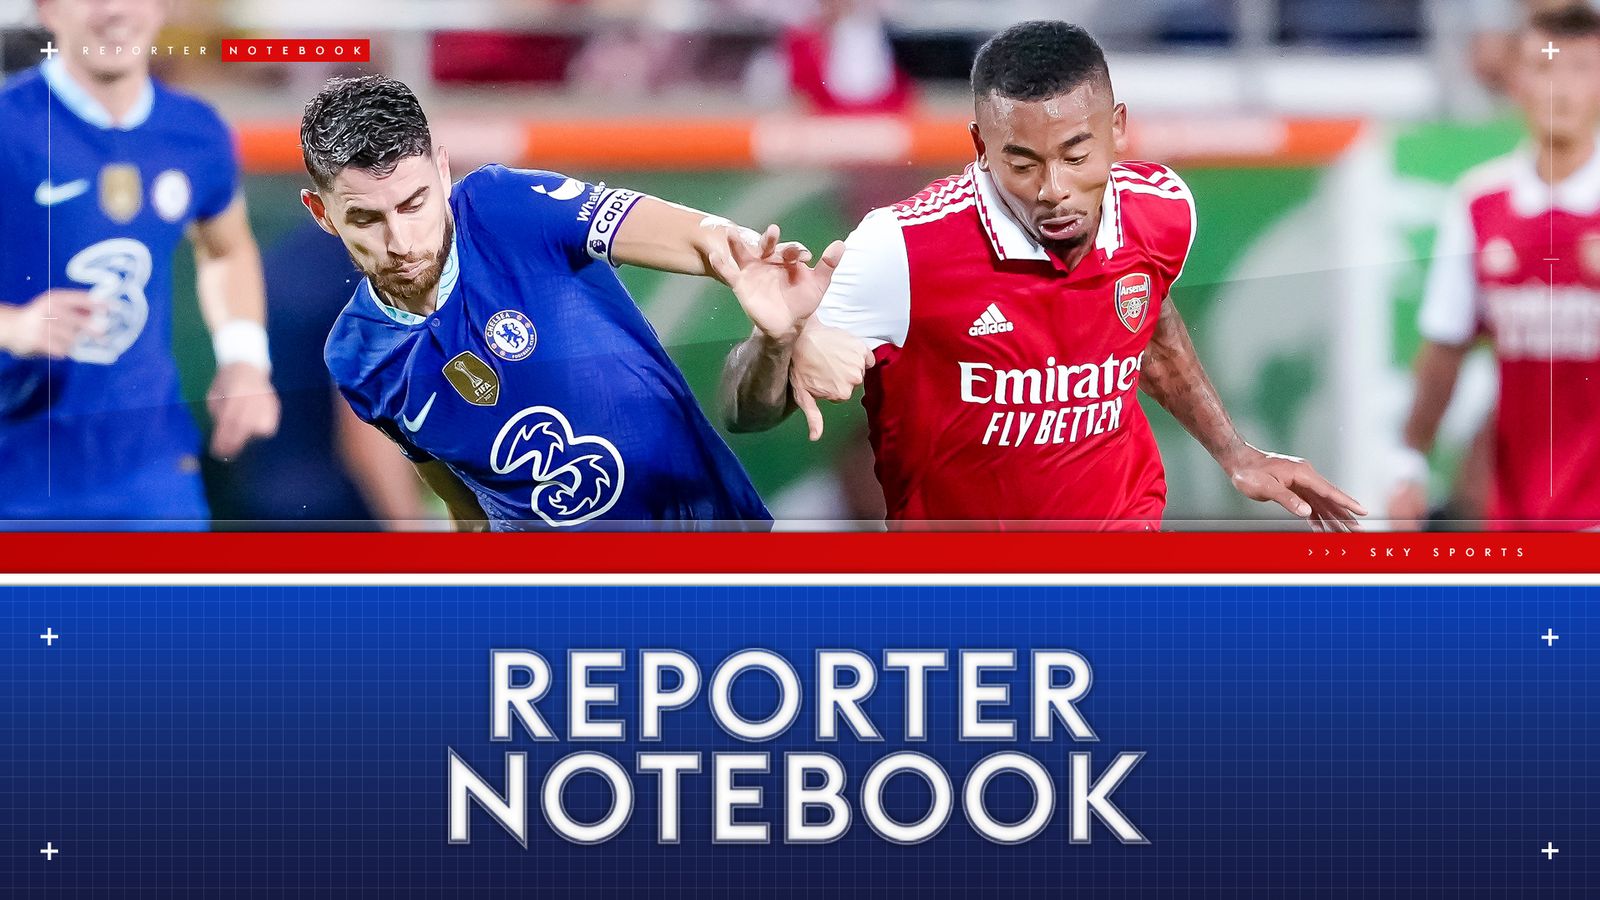 Reporter notebook: Arsenal look strong in Orlando as 4-0 win over Chelsea leaves Blues boss Thomas Tuchel angry